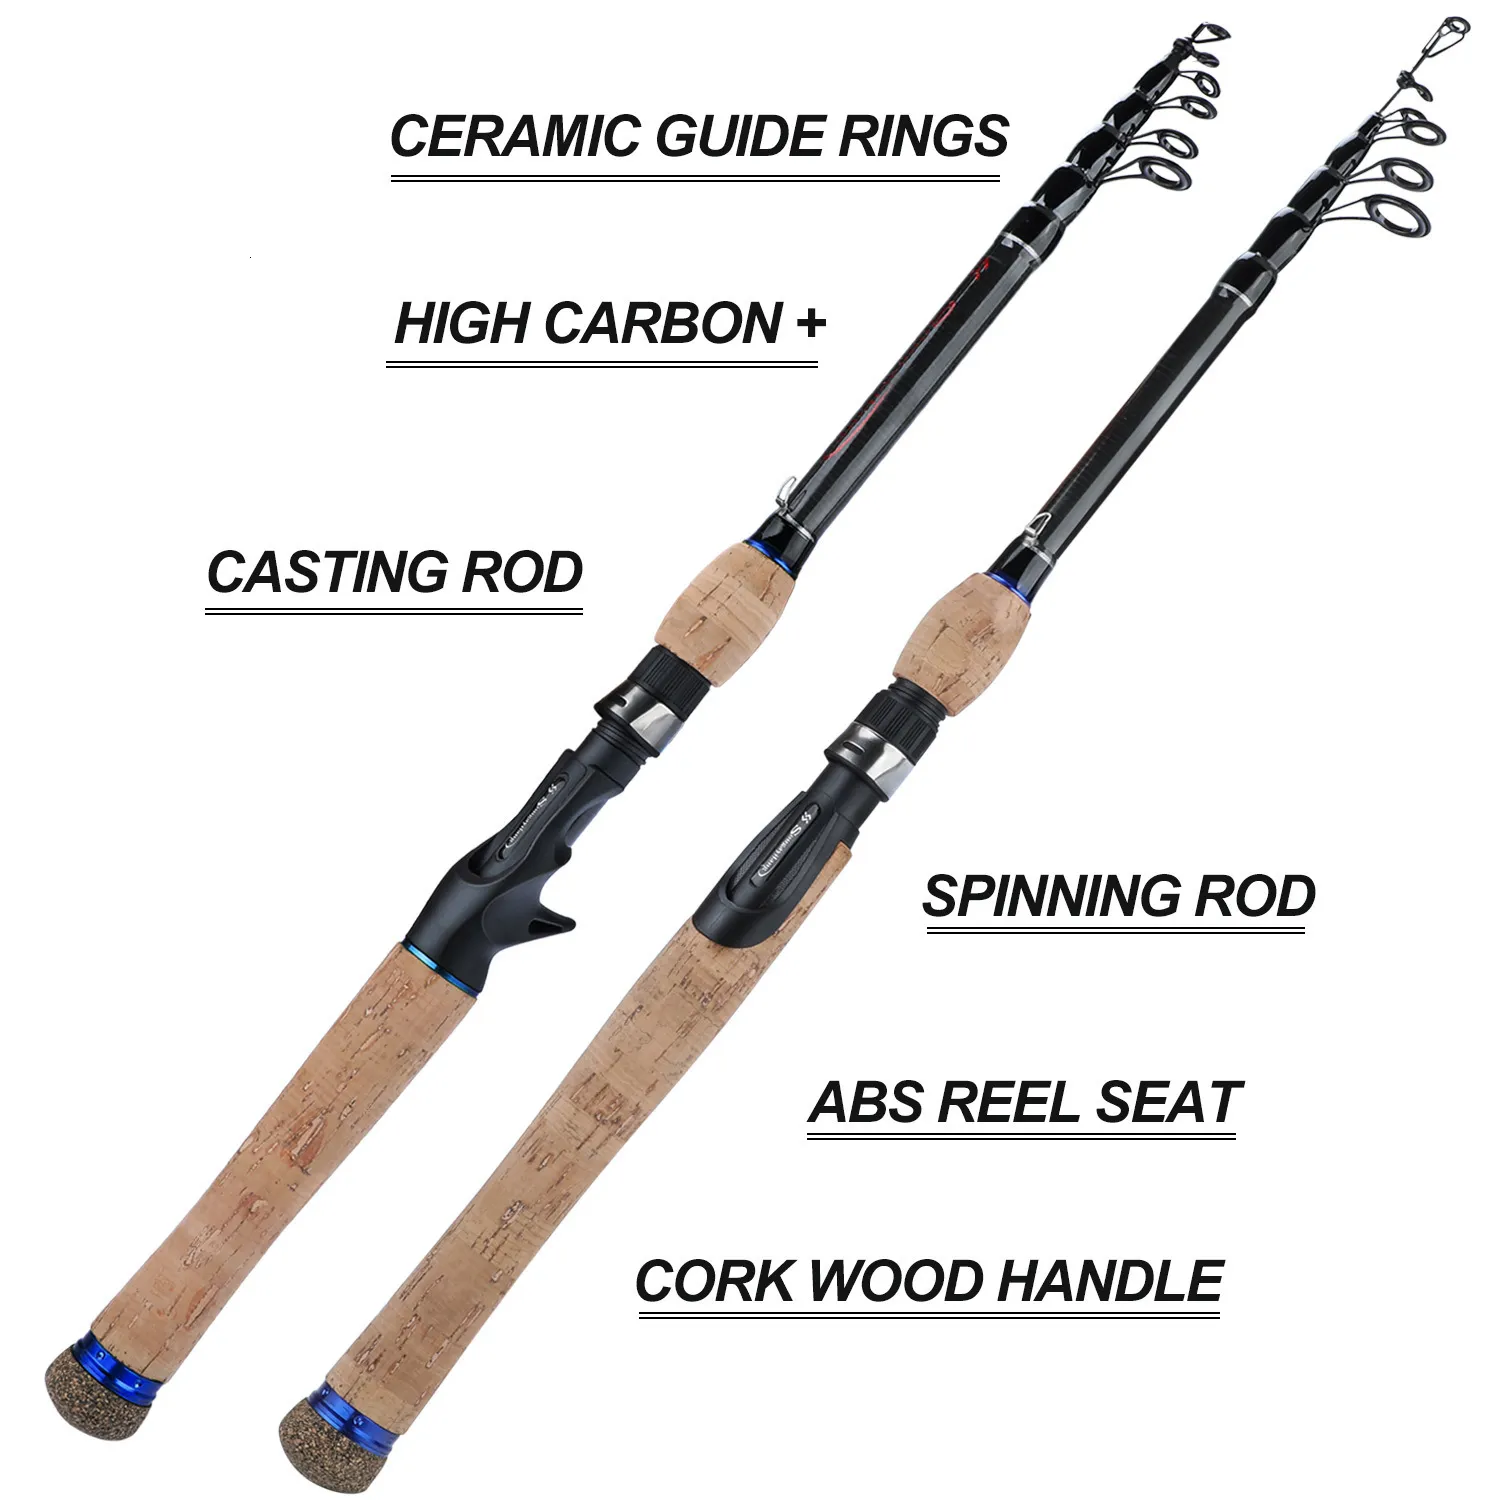 Sougayilang Portable Telescopic Unbreakable Fishing Rod Carbon Fiber Cork Wood  Handle, Spinning/Casting, Boat Fishing Tackle Available In 1.8M, 2.1M;  2.,4M And 2M Lengths Model: 230324 From Yao09, $14.91